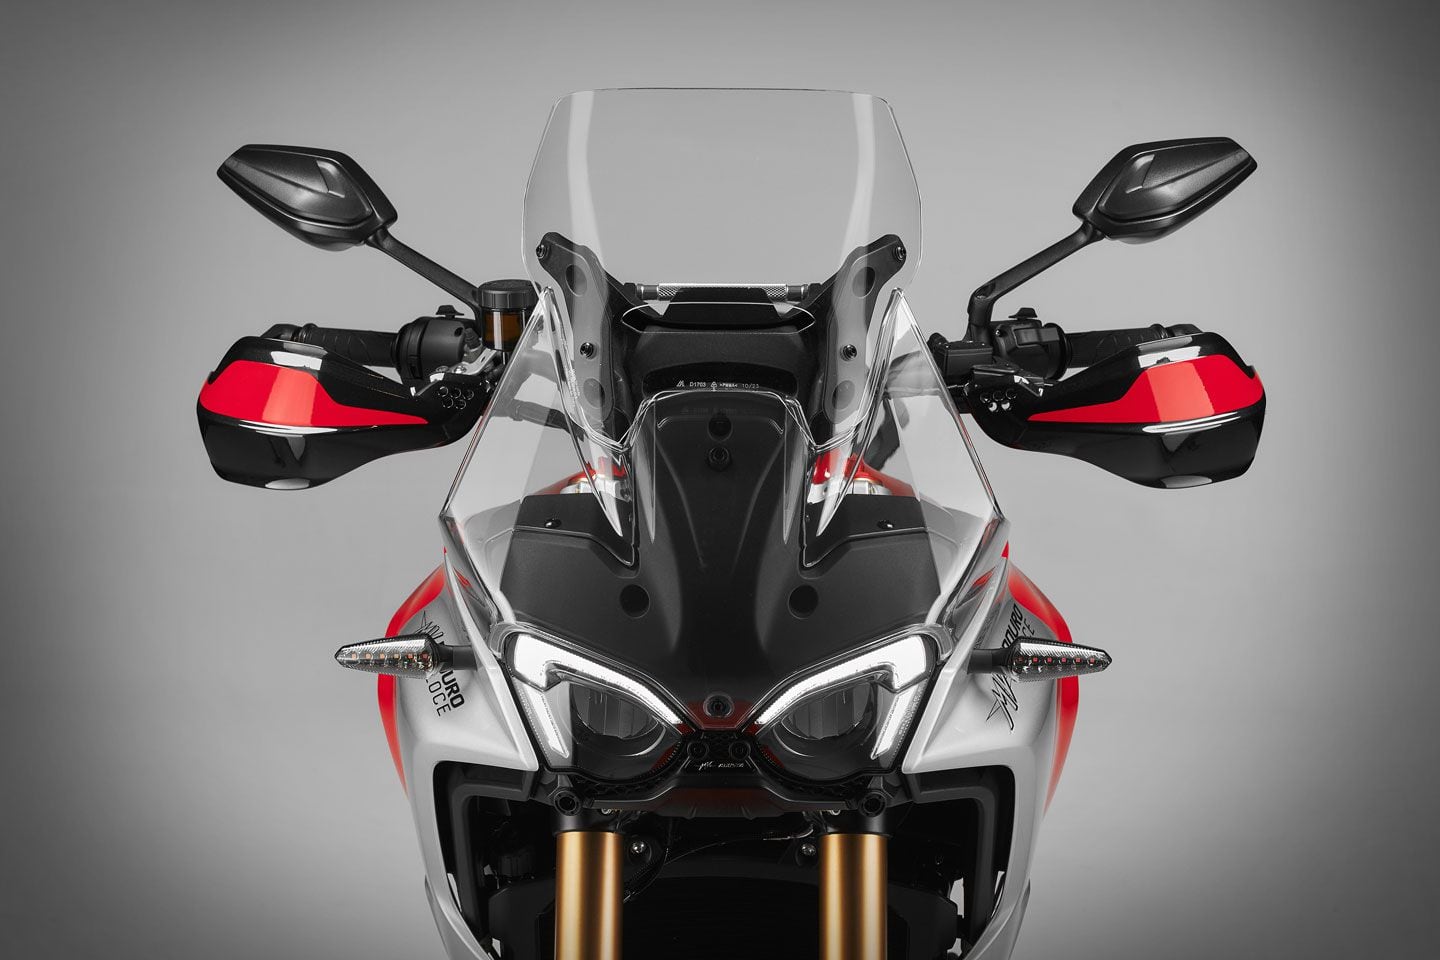 The Enduro Veloce’s upper fairing blends into the windscreen in a seamless manner for a very clean look. Hand guards are standard.